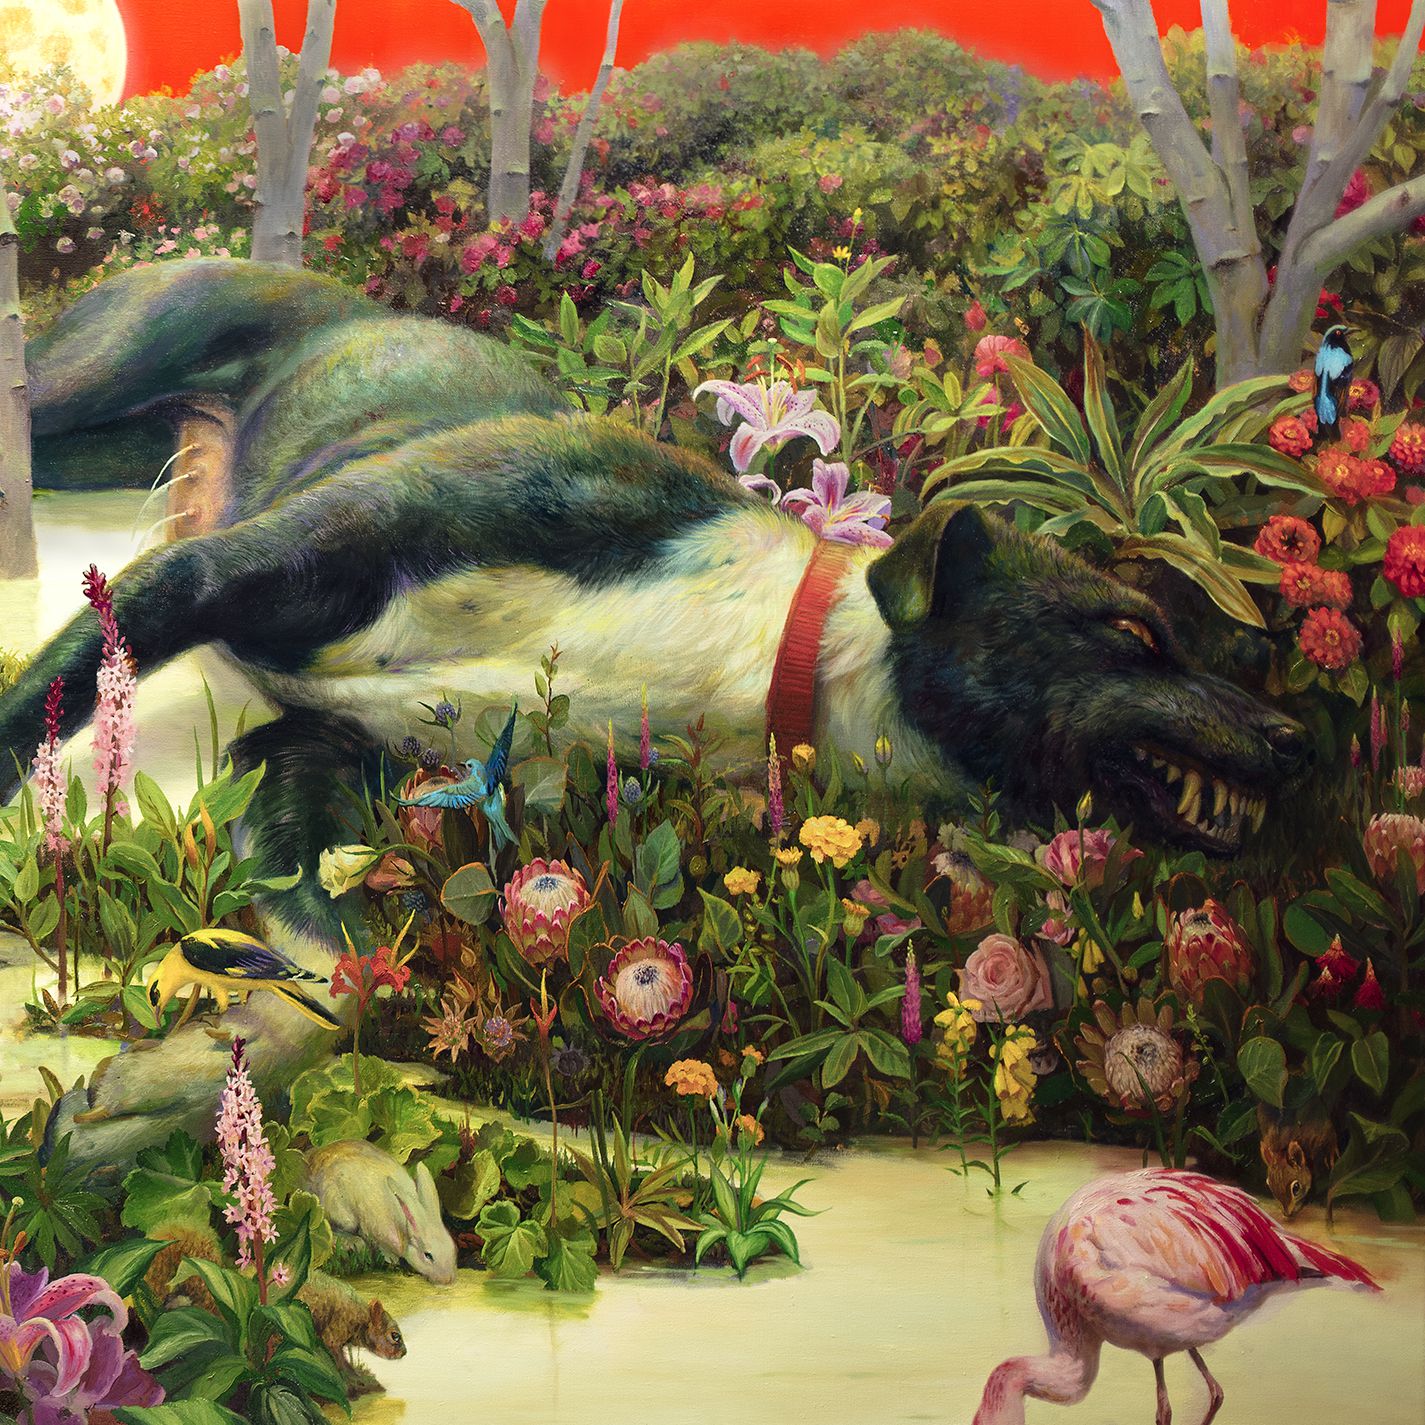 Rival Sons announce North American headlining tour